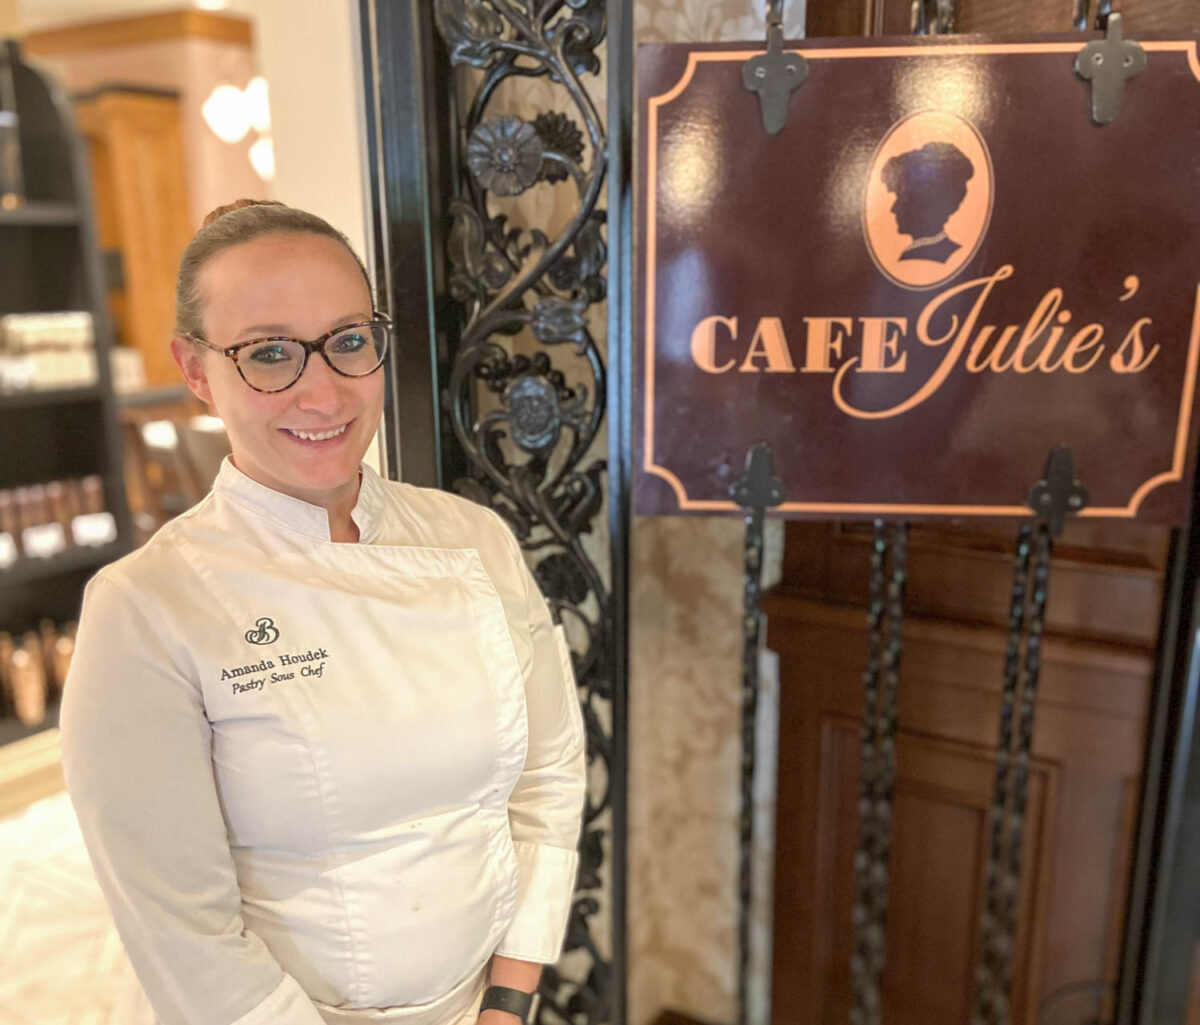 Pastry Chef at Broadmoor standing near sign for Cafe Julie's